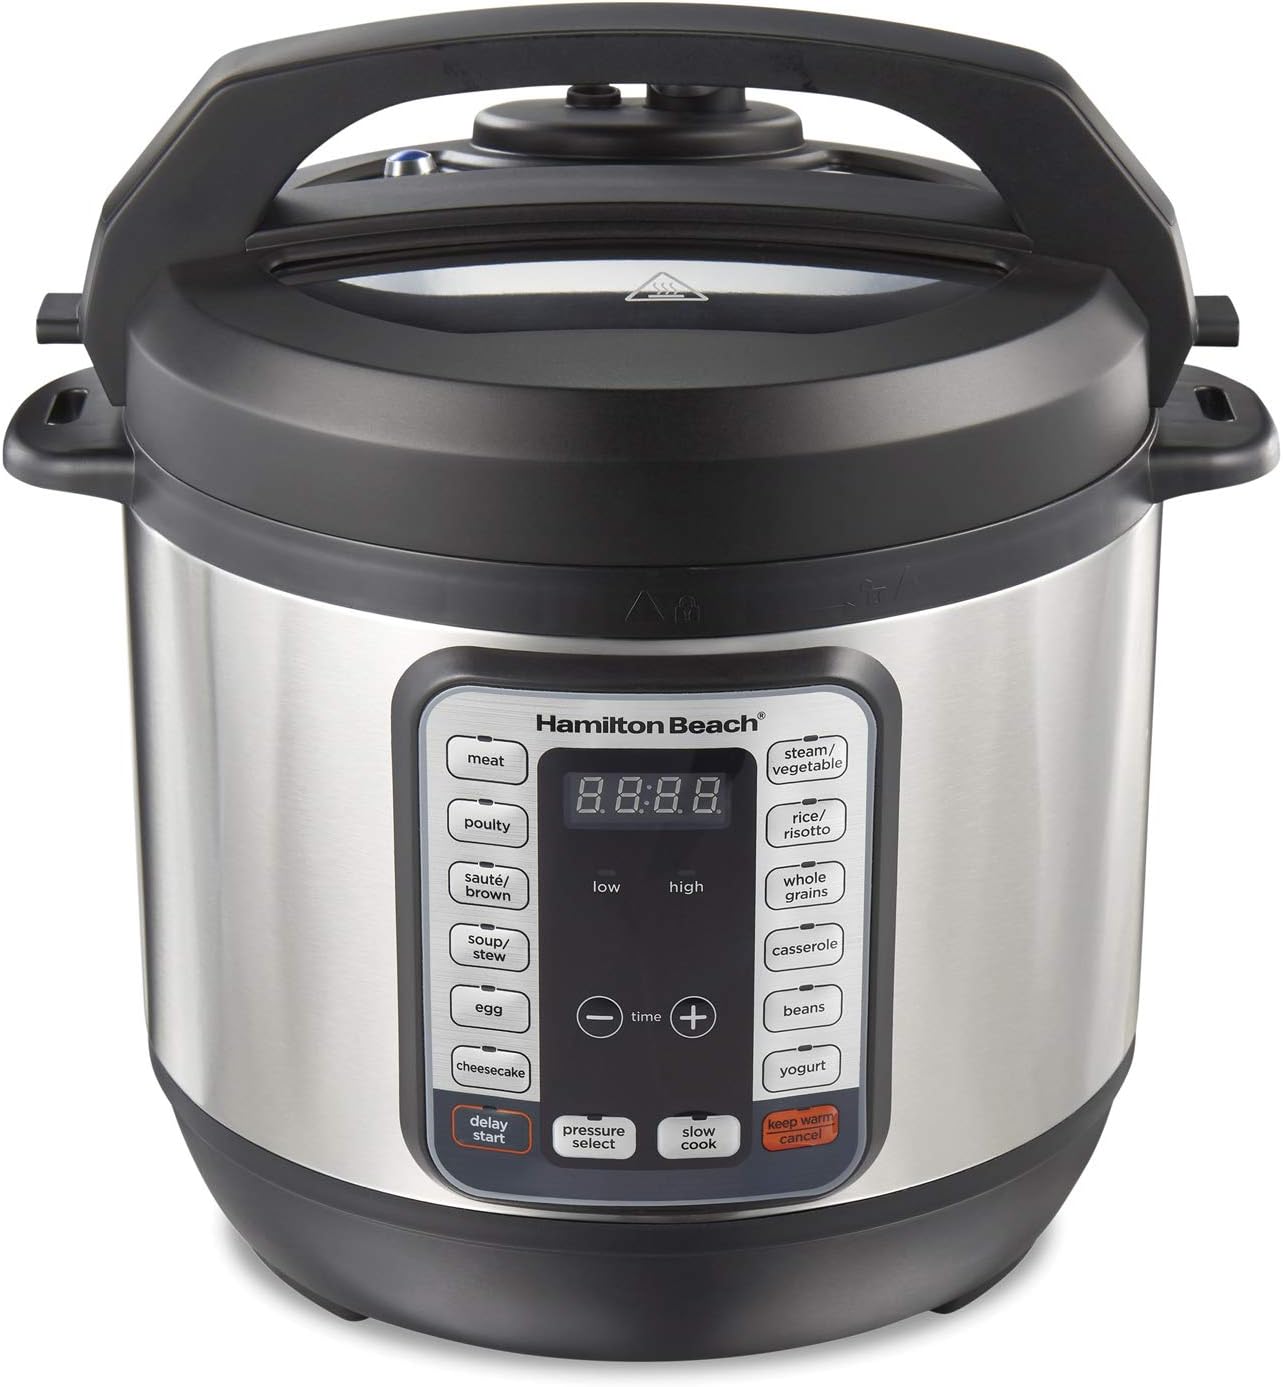 Hamilton Beach 12-in-1 Electric Pressure Cooker with True Slow Cook Technology, Sautés, Browns, Steams, Rice Function, Egg and More, 8 Quart Capacity, Stainless Steel (34508)